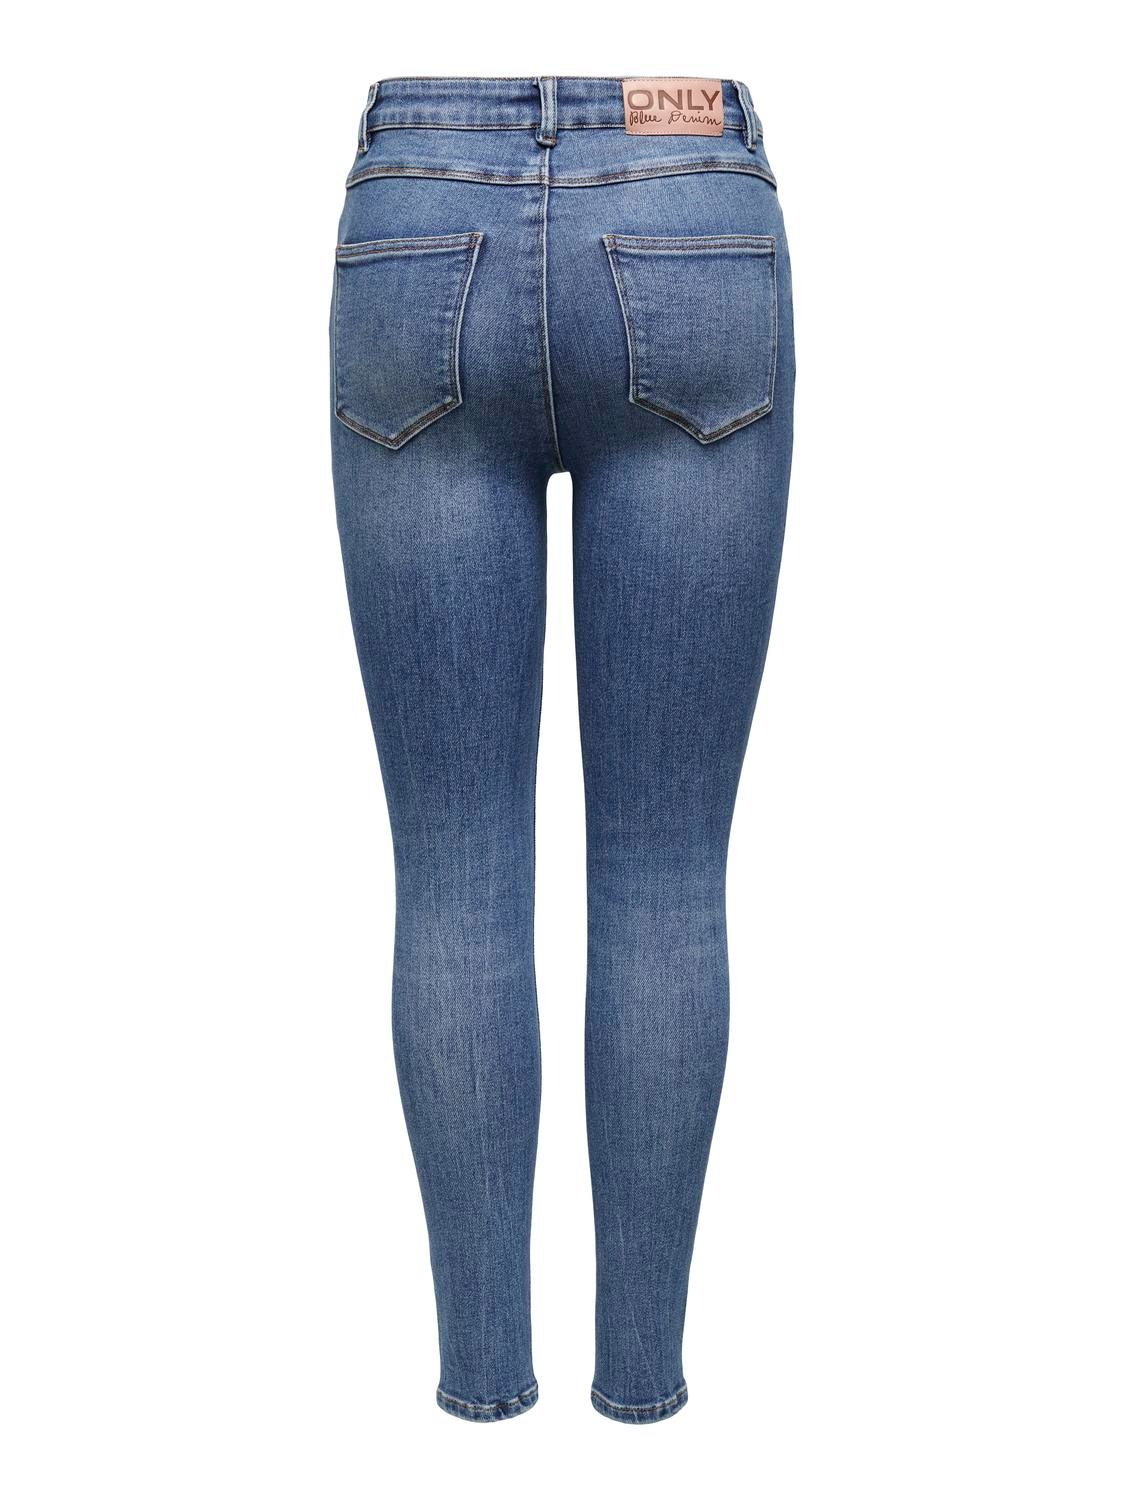 ONLY Skinny Fit Hohe Taille Offener Saum Jeans -Medium Blue Denim - 15195399